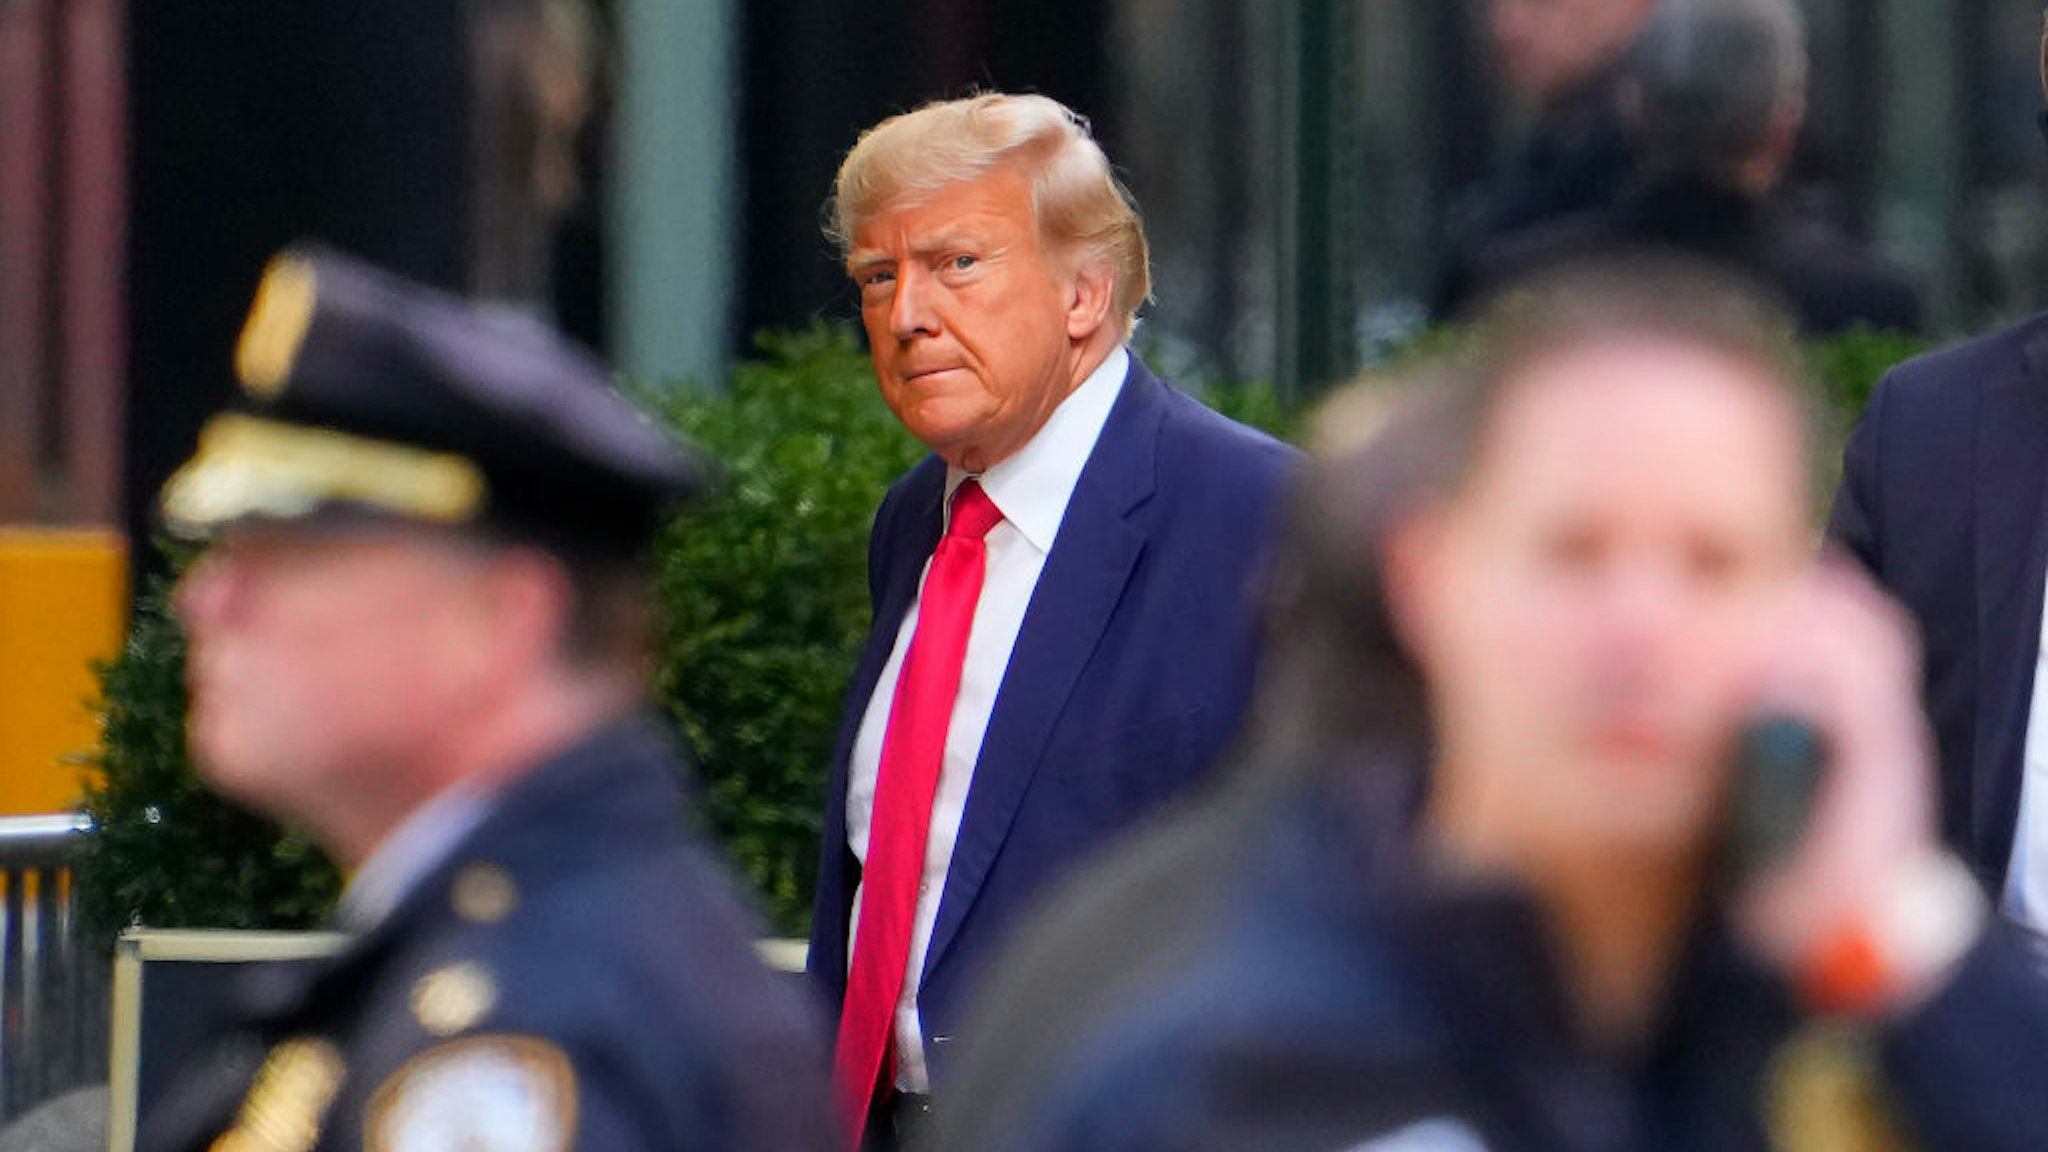 Former U.S. President Donald Trump arrives at Trump Tower on April 03, 2023 in New York City.